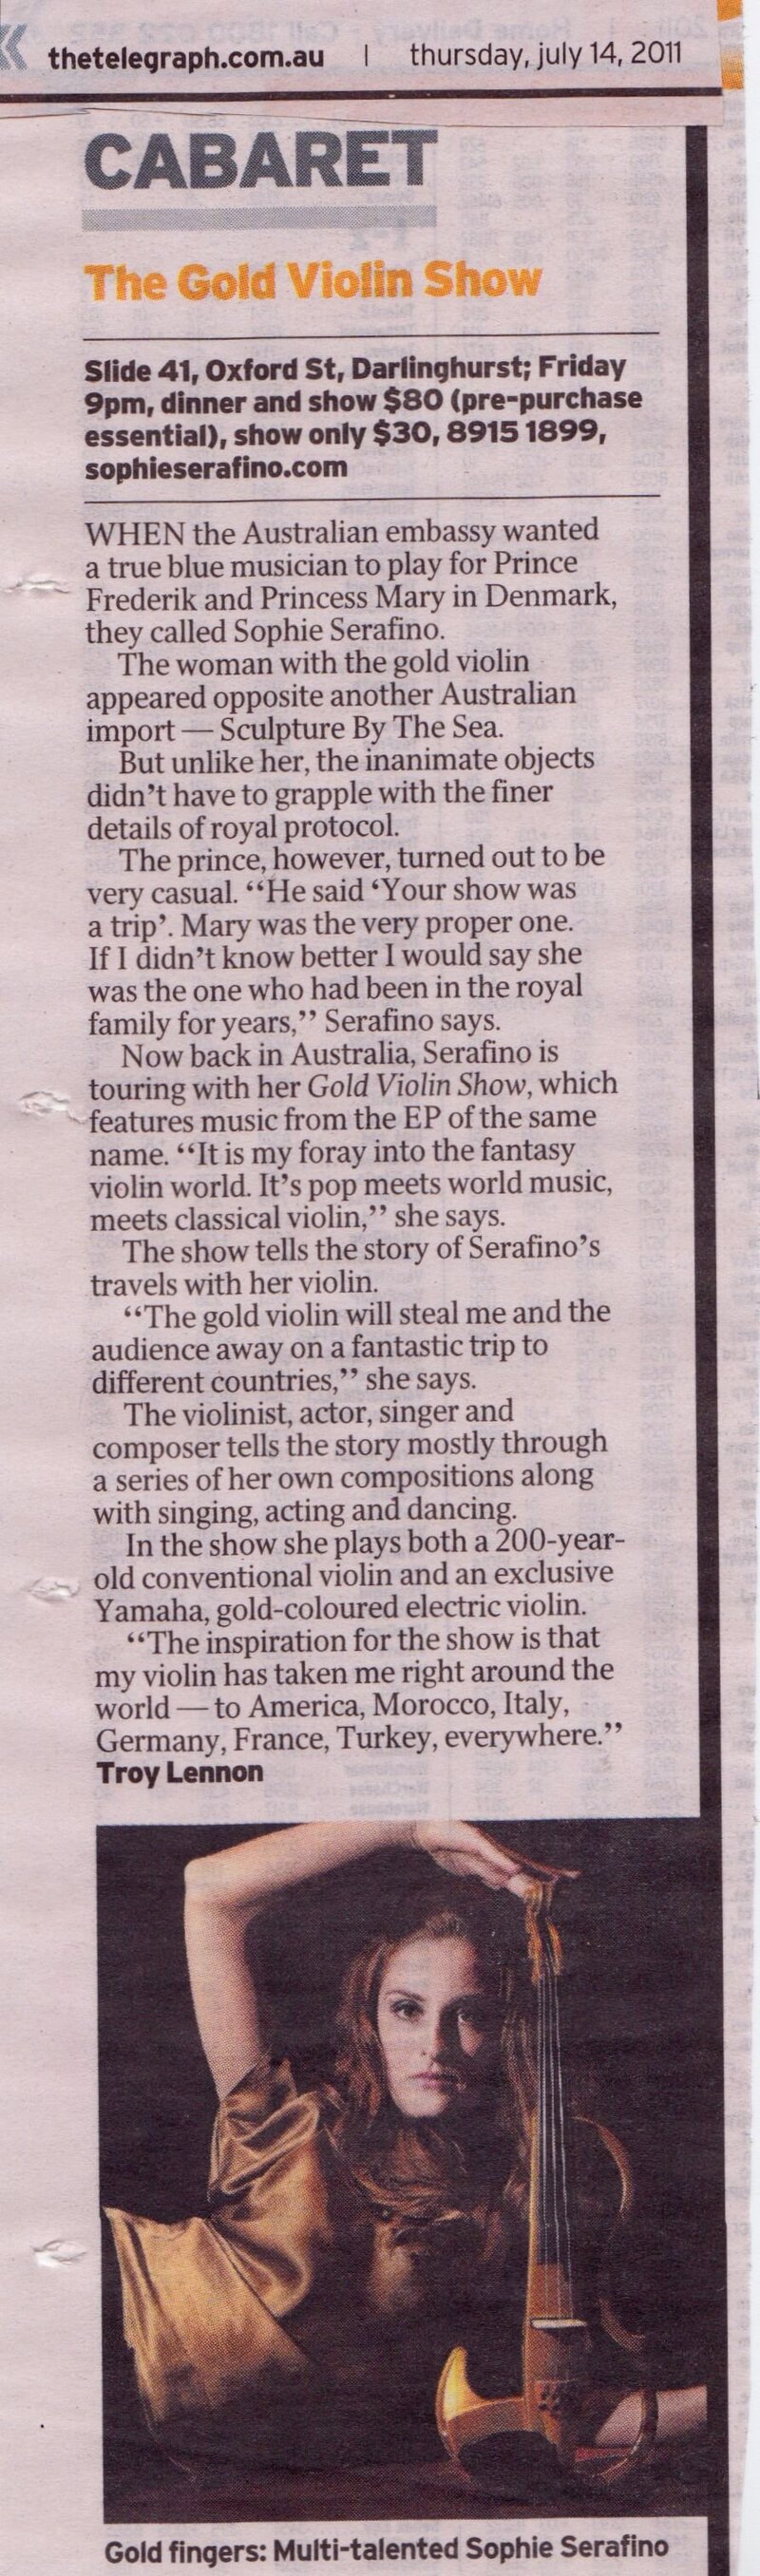 Daily Telegraph 14th July 2011